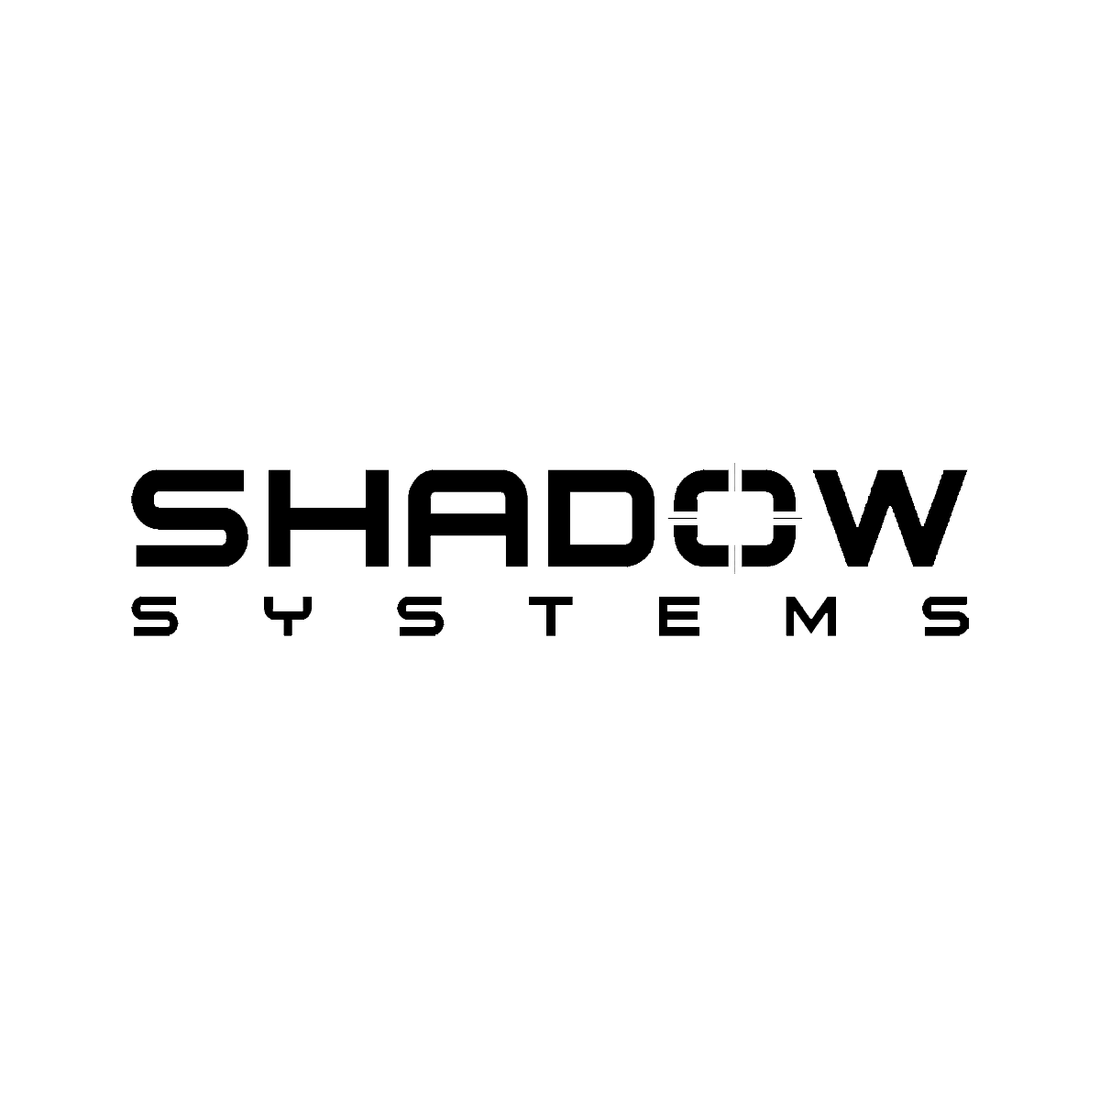 Shadow Systems Freedom Drop Leg Holsters